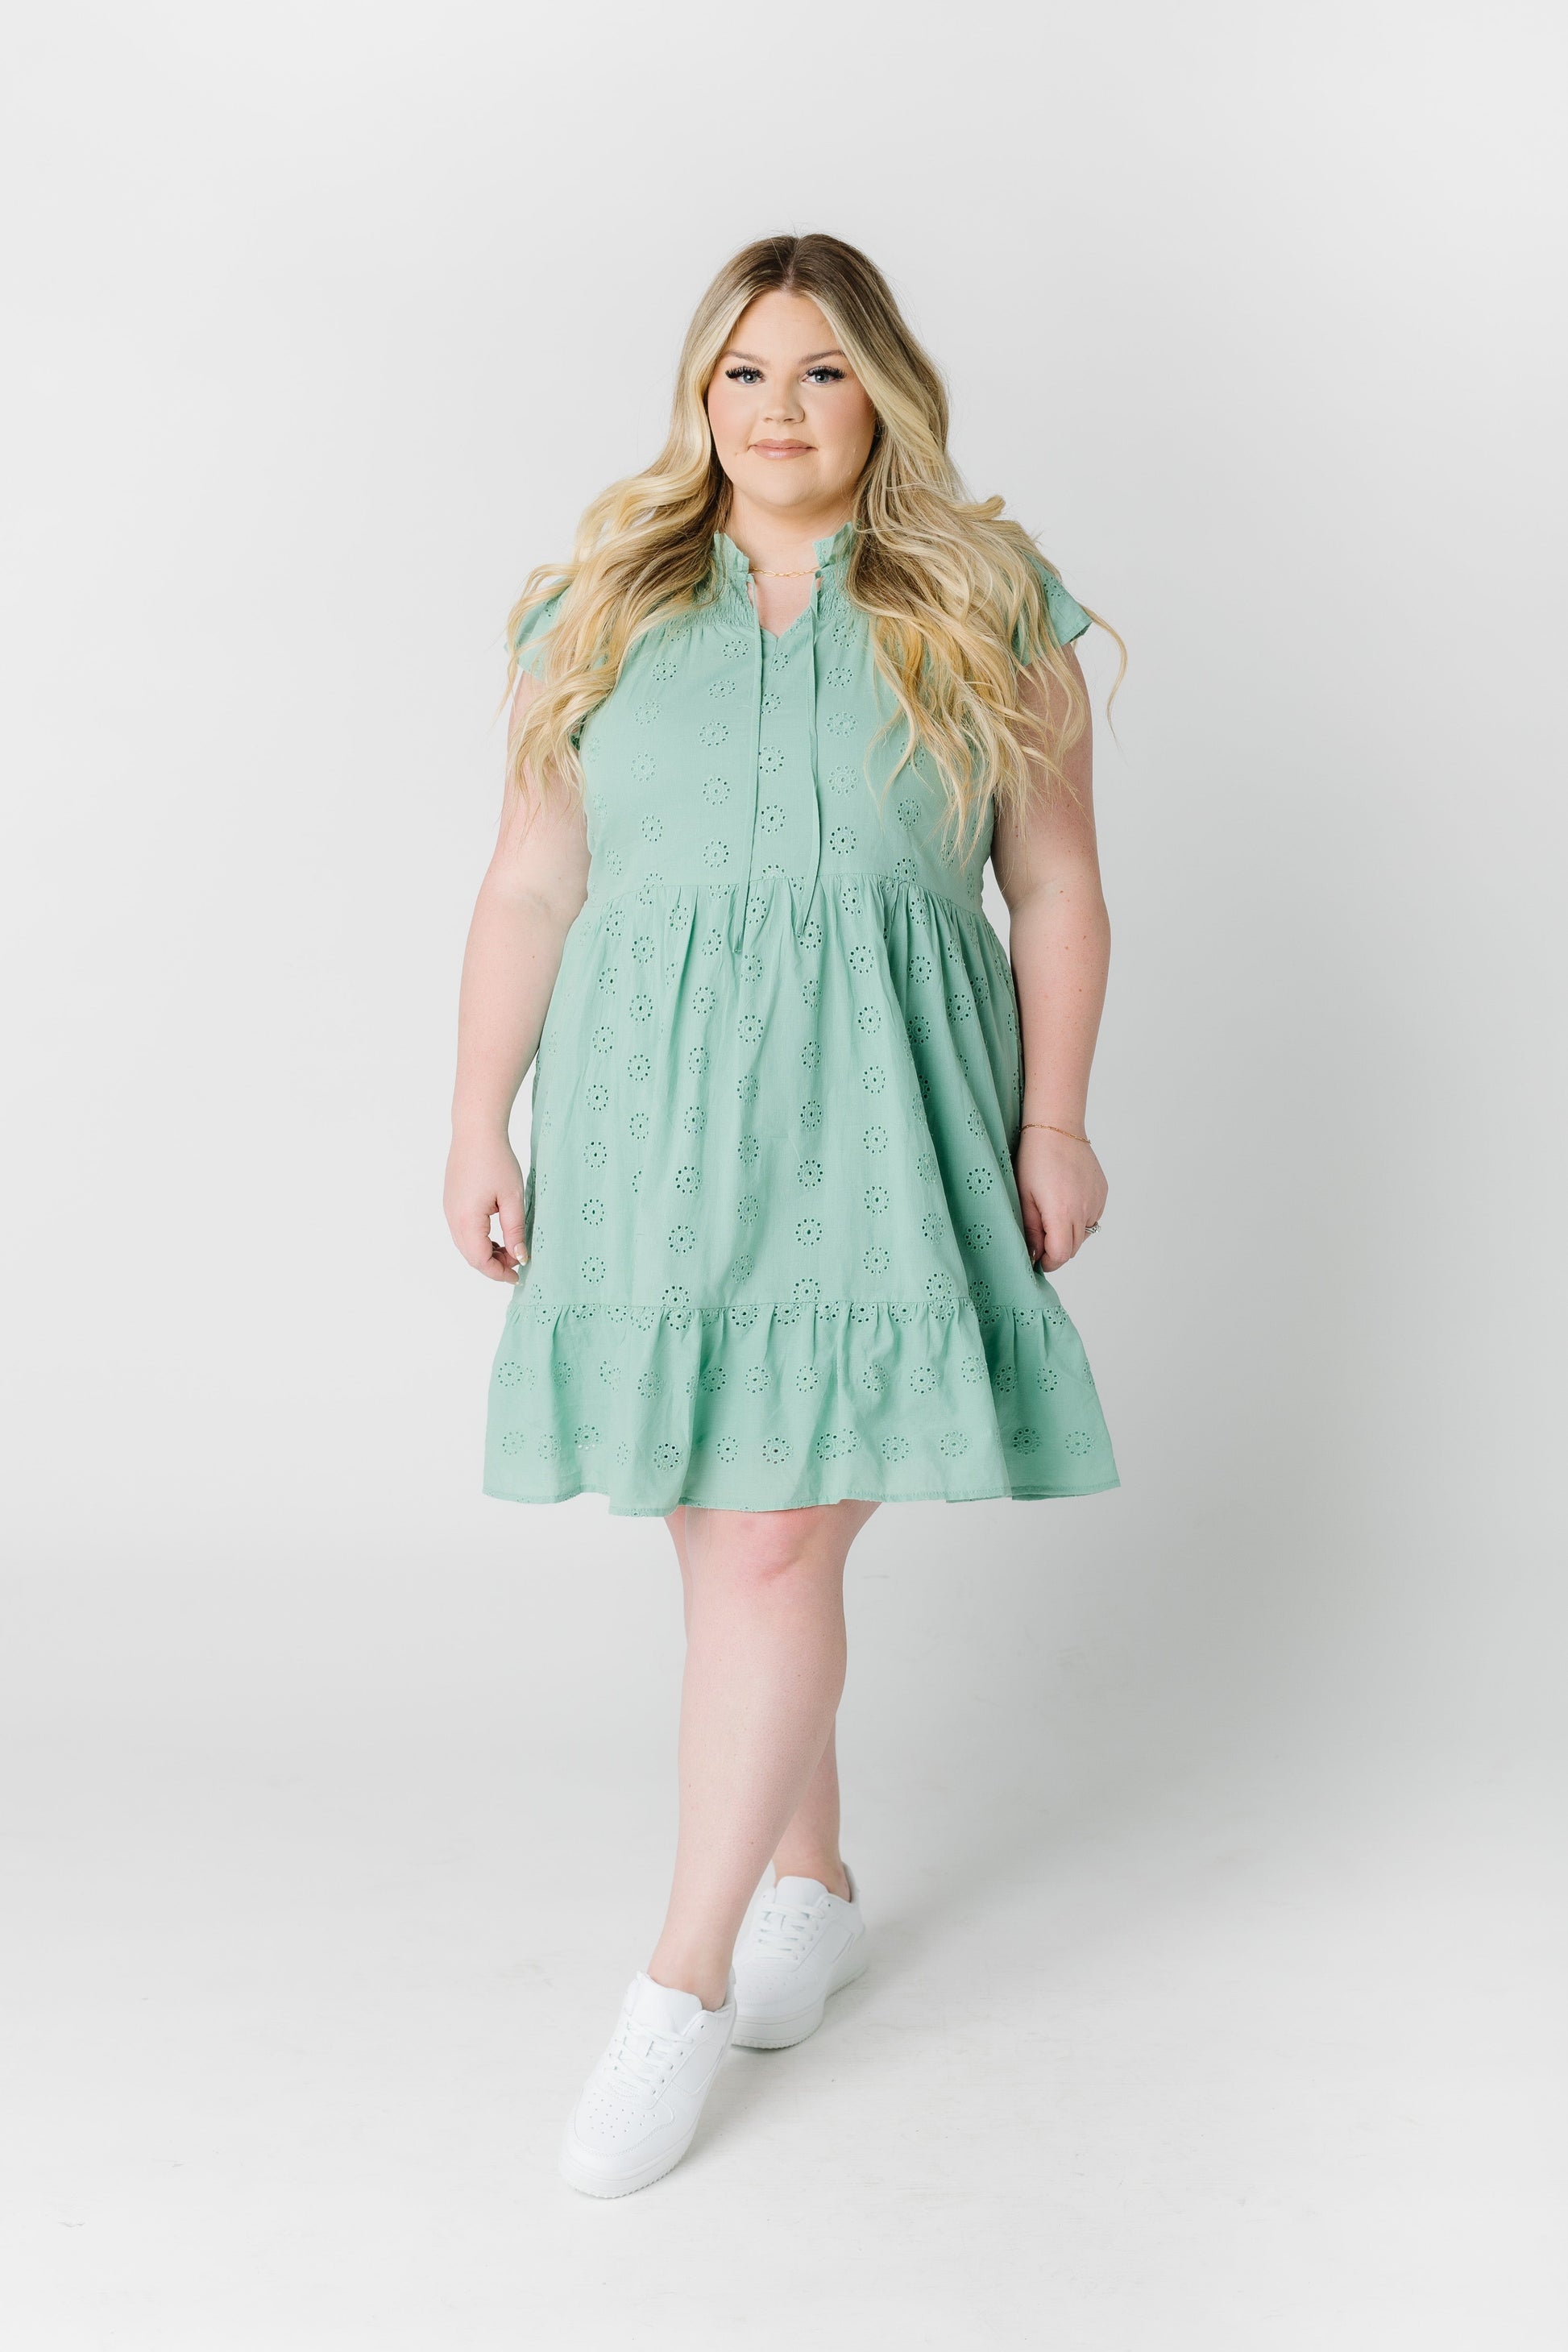 Brass & Roe Darling Eyelet Dress – Called to Surf